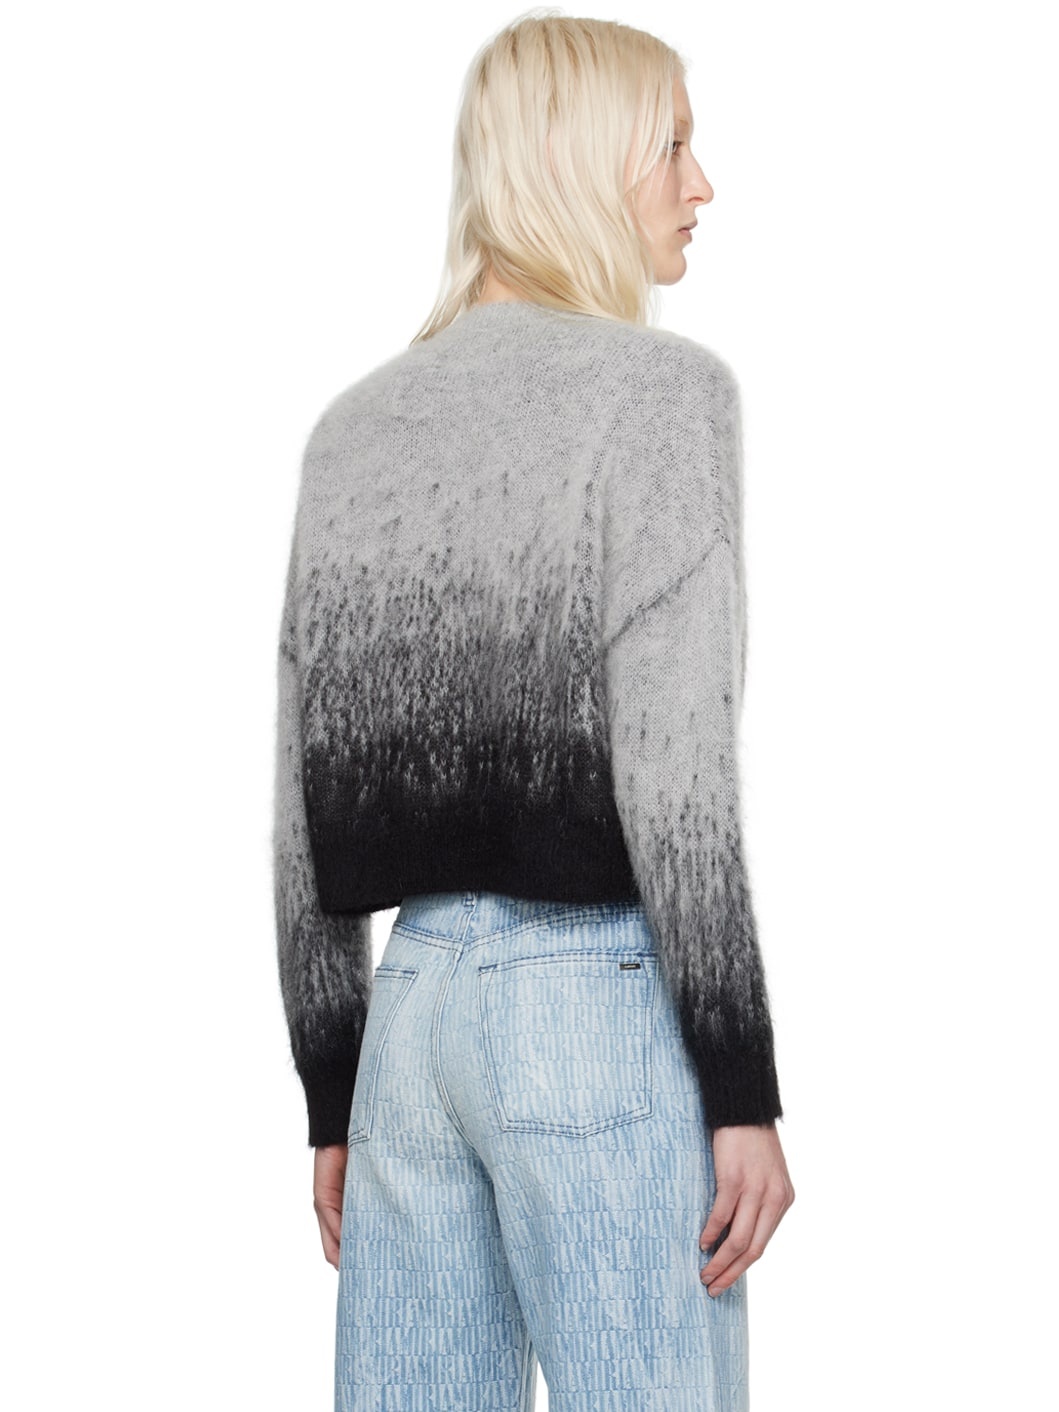 Gray Staggered Ombre Sweater - 3